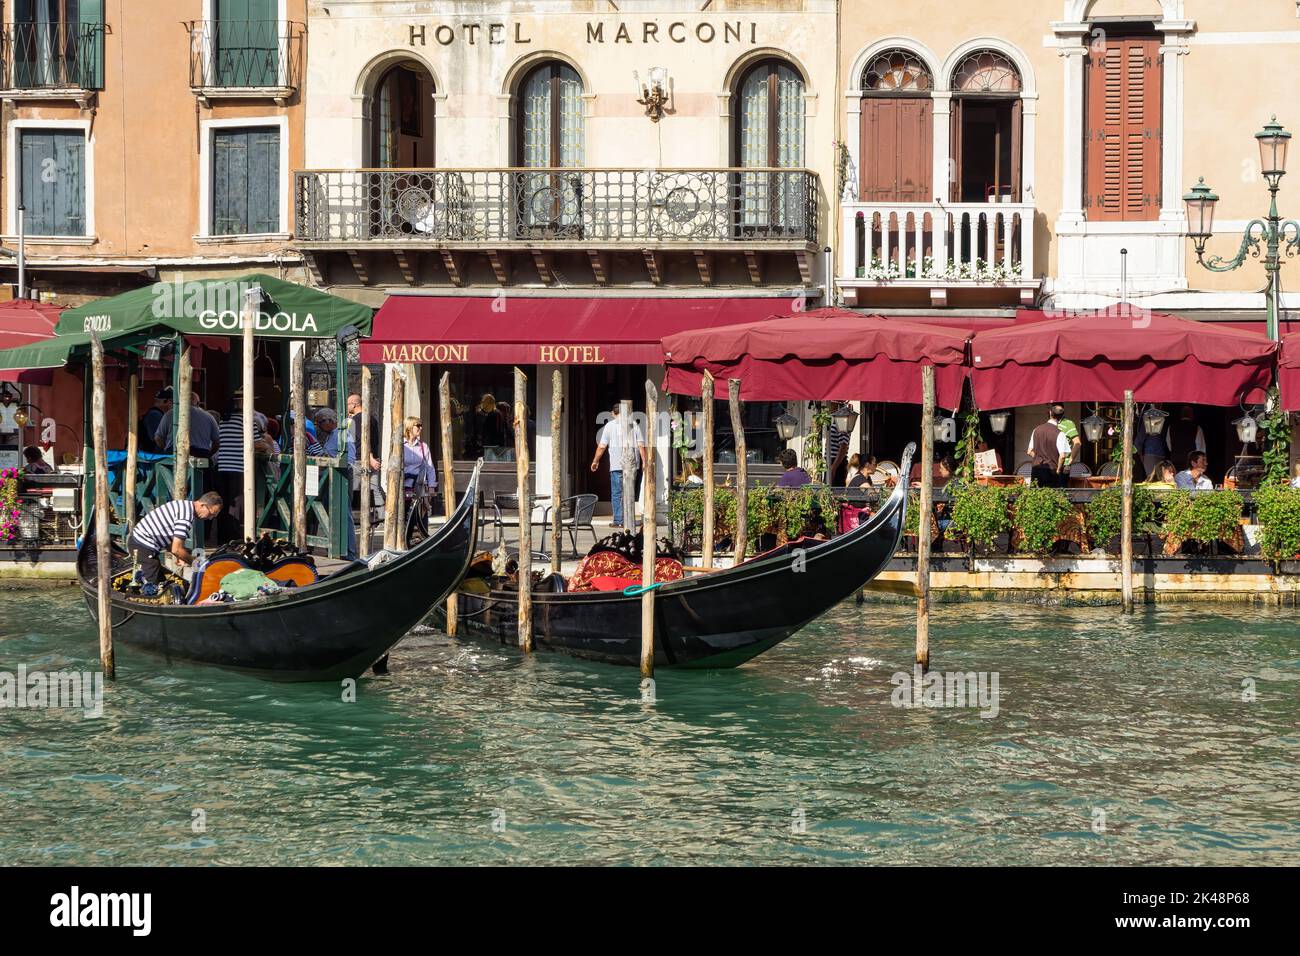 VENICE, ITALY - OCTOBER 12 : View of the Hotel Marconil in Venice on October 12, 2014. Unidentified people. Stock Photo